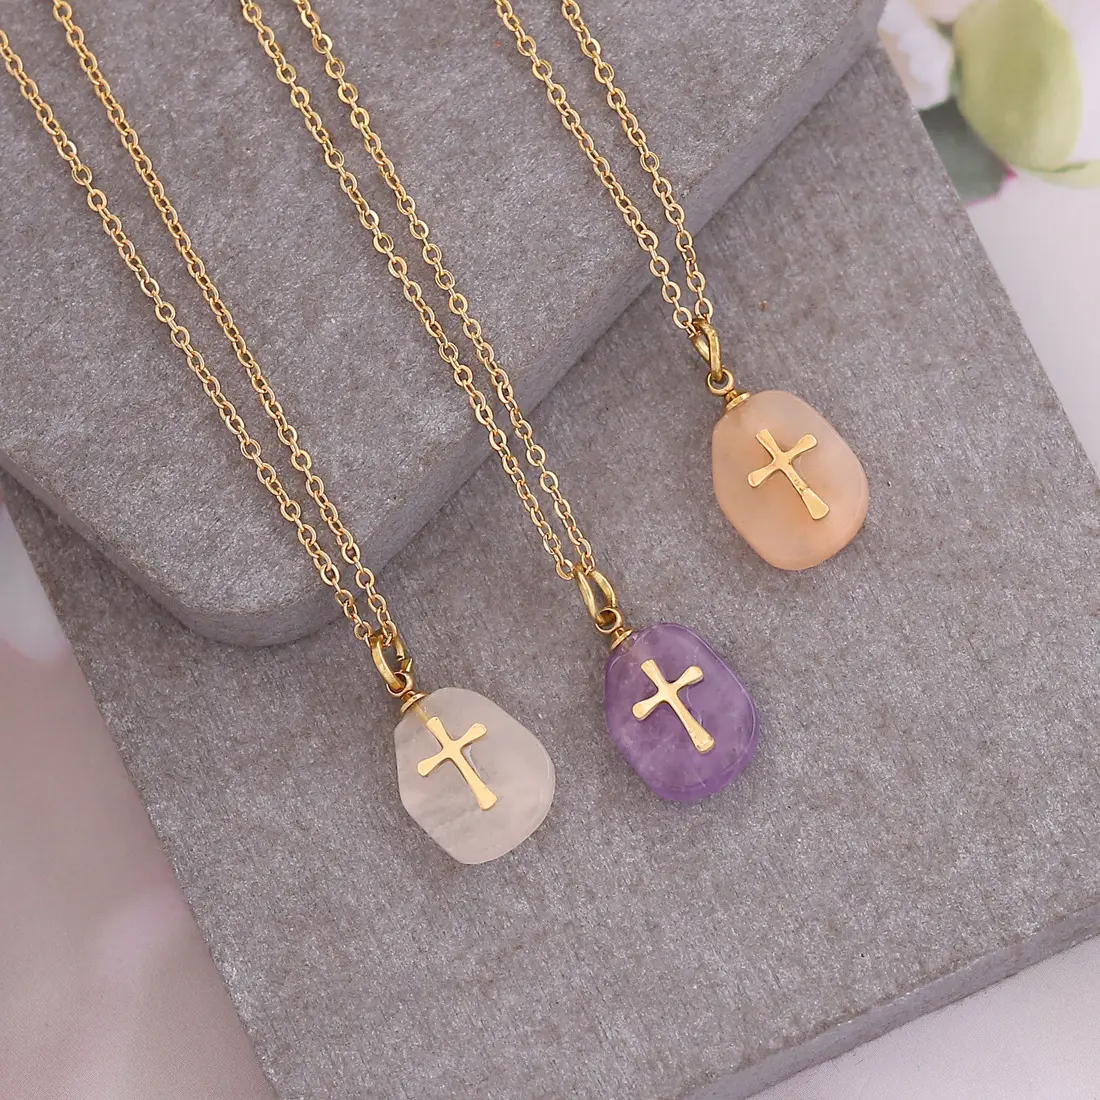 New High Quality Natural Stone Amethyst Necklace Quartz 18k Gold PVD Plated Stainless Steel Chain Cross Necklace